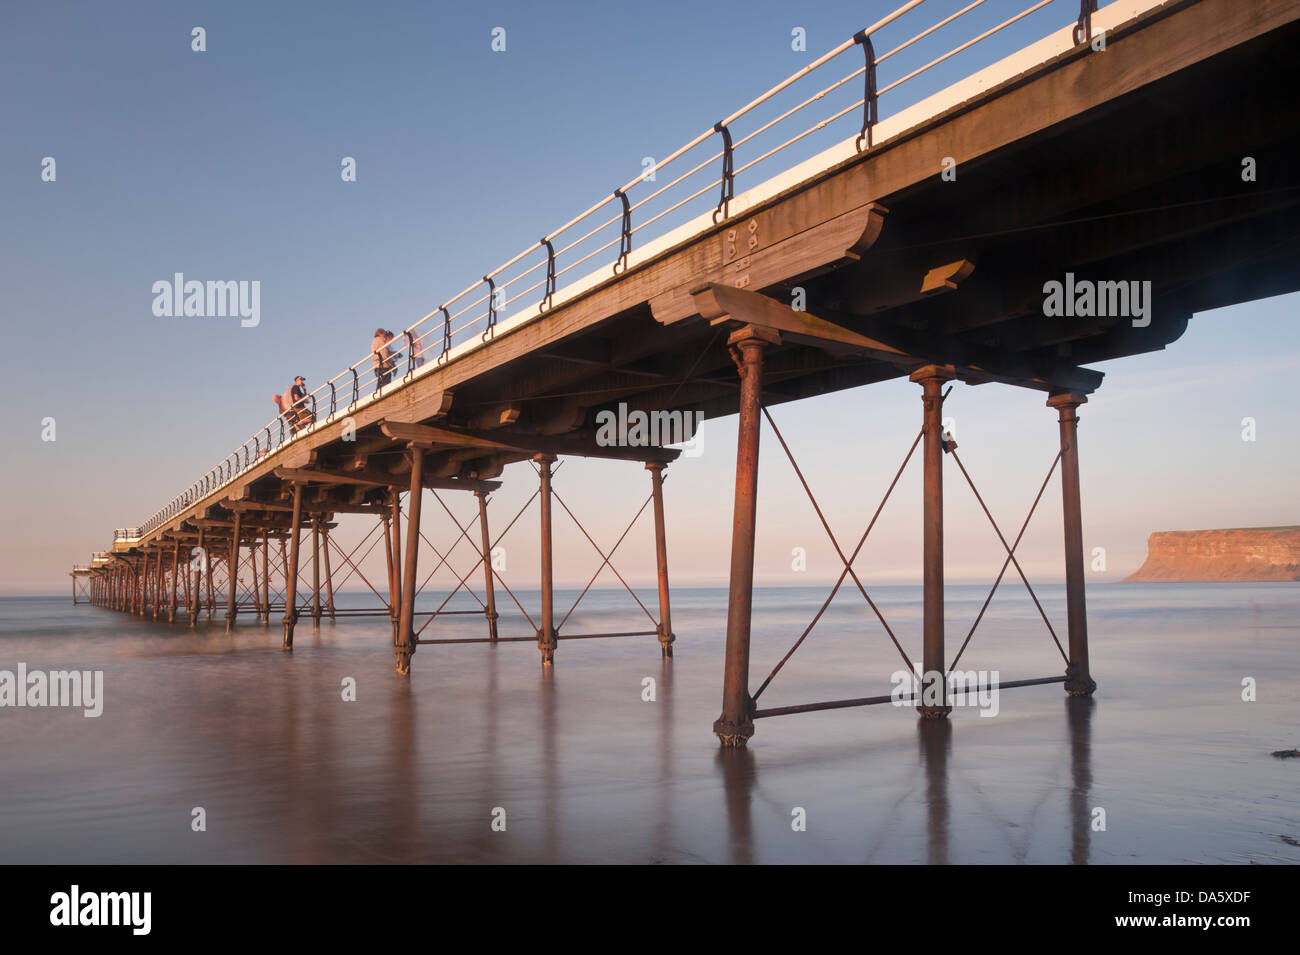 Blue summer evening sky & view of people standing & walking in sun, on historic scenic seaside pier over calm sea - Saltburn-by-the-Sea, England, UK. Stock Photo